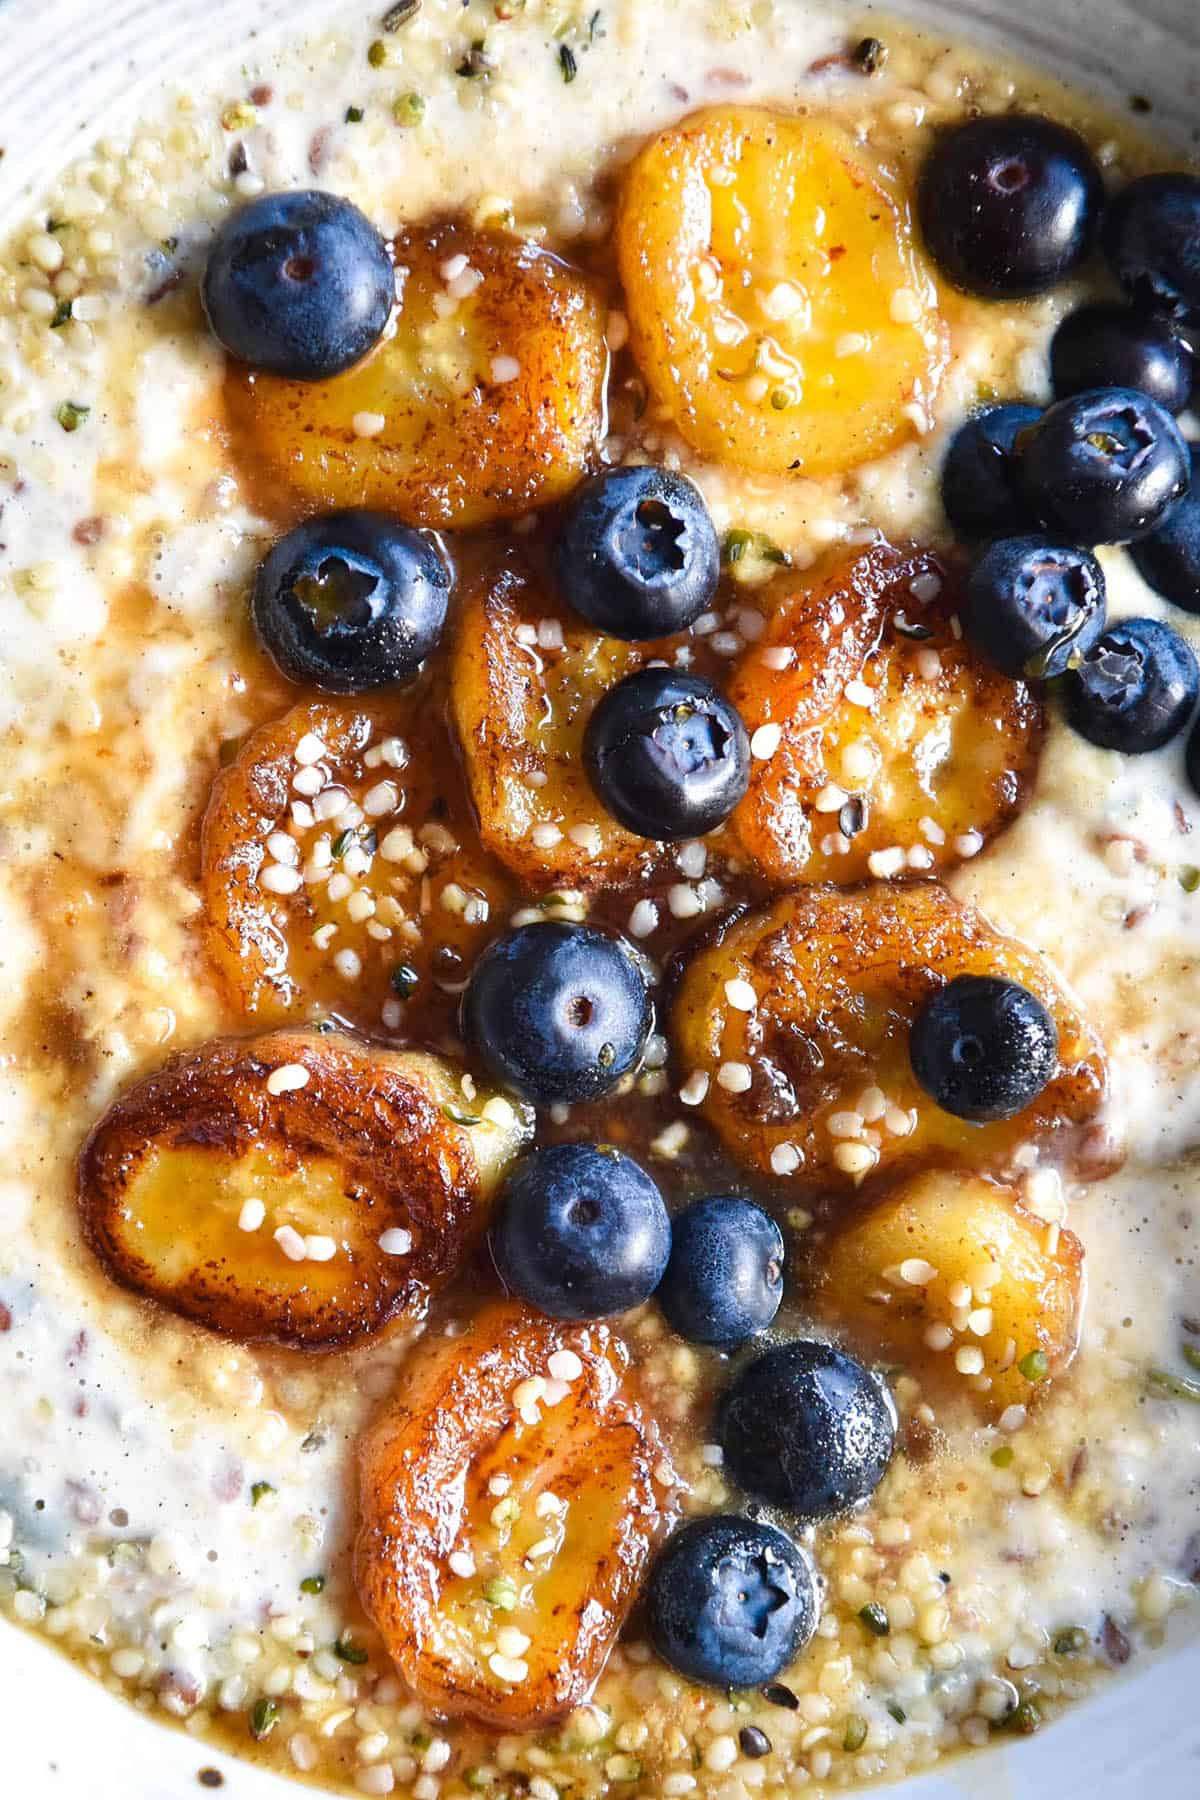 An aerial close up view of a bowl of seedy gluten free porridge topped with caramelised bananas, fresh blueberries and a sprinkle of hemp seeds